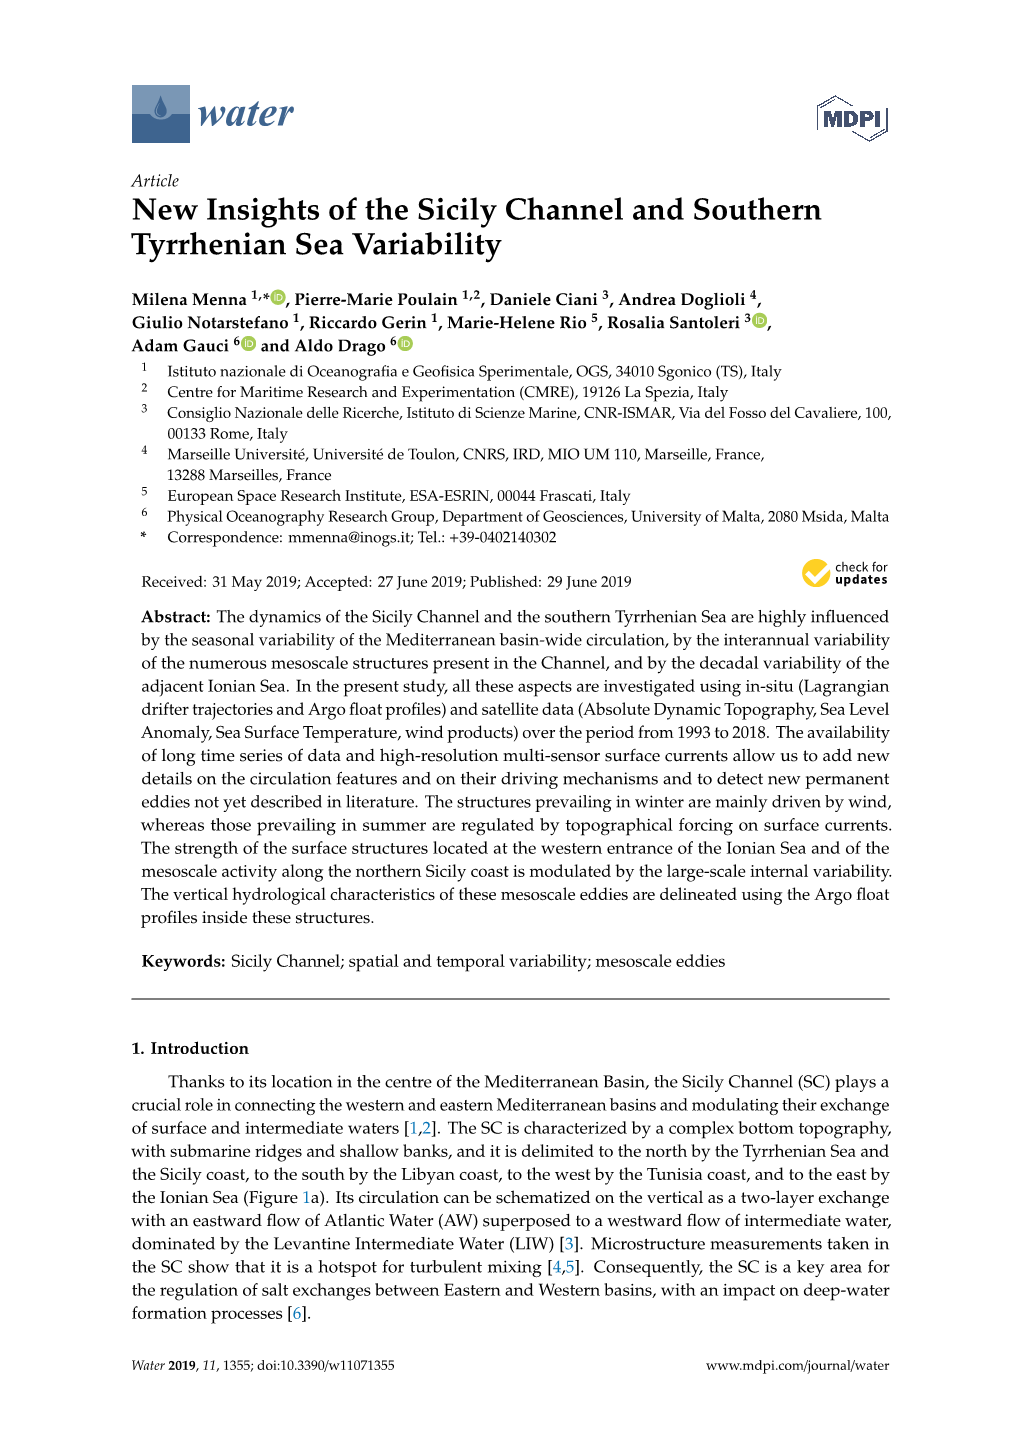 New Insights of the Sicily Channel and Southern Tyrrhenian Sea Variability